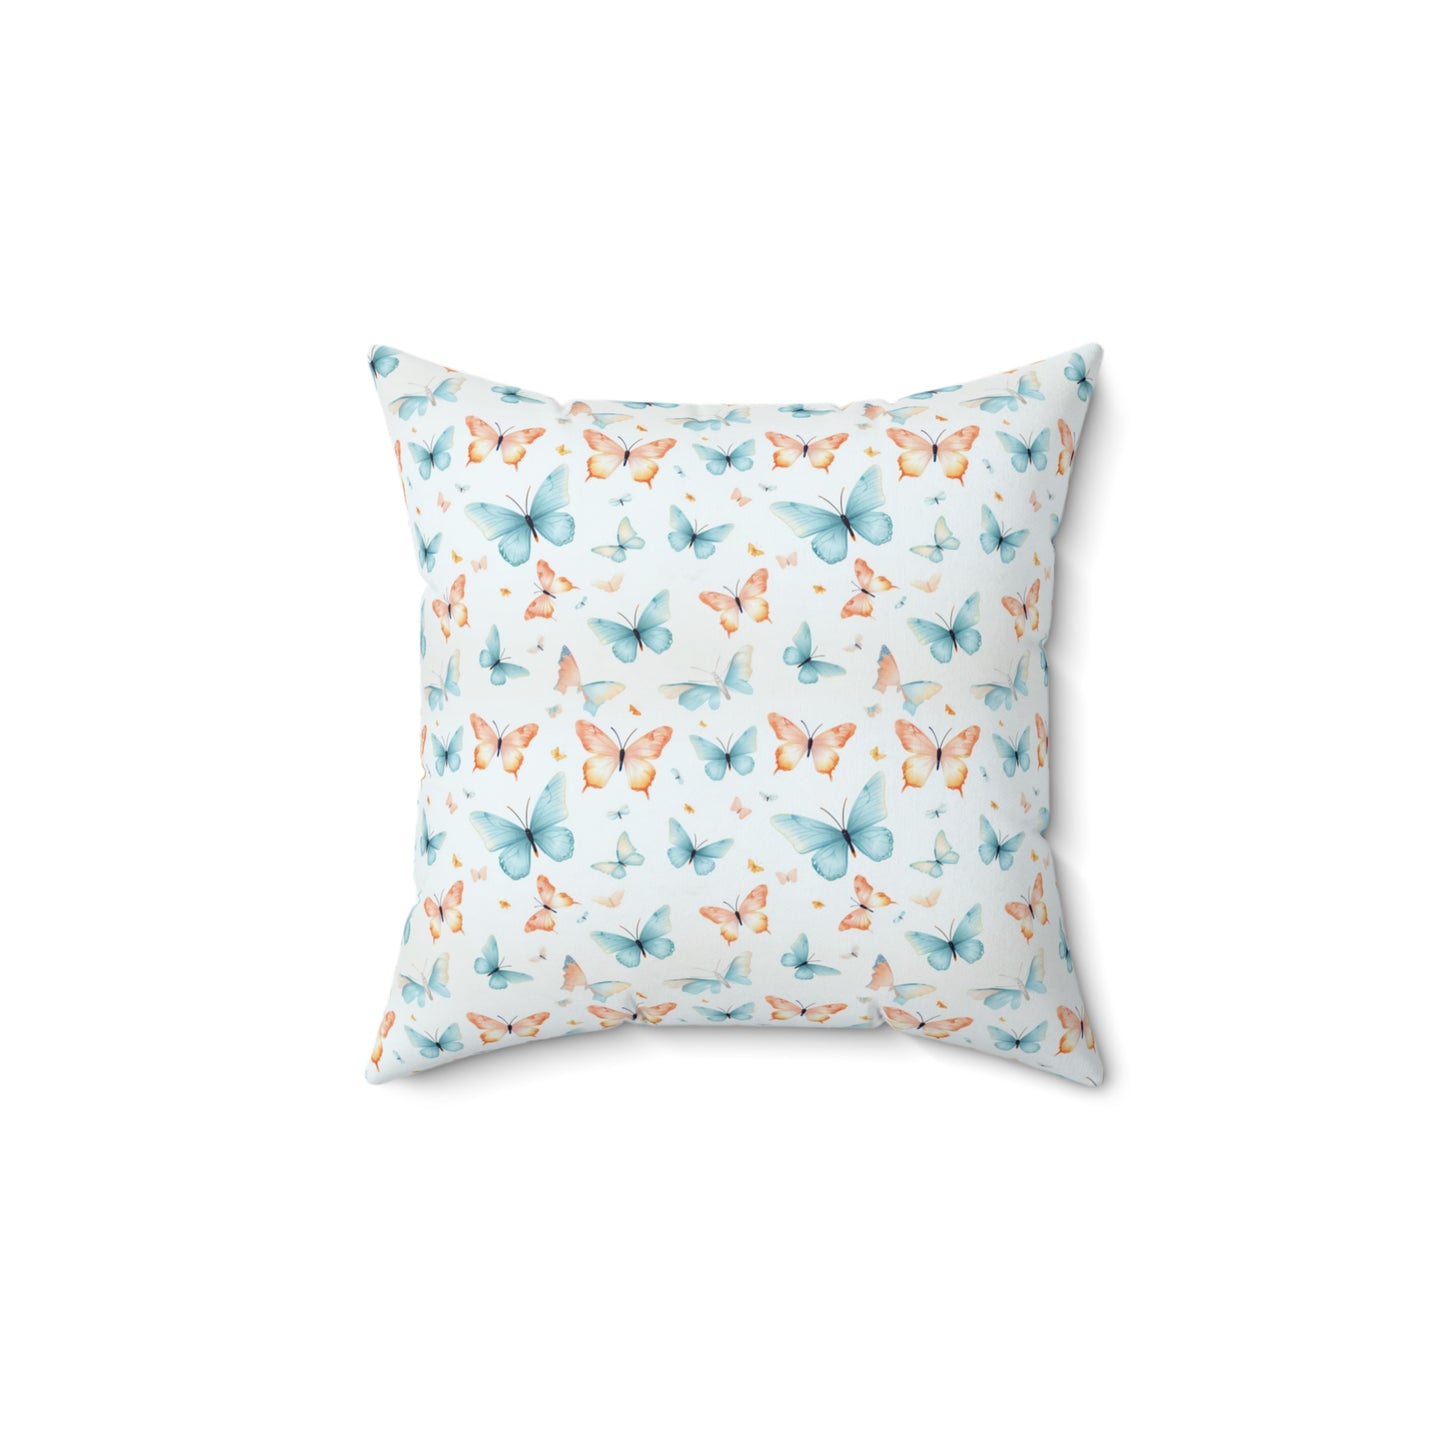 Butterfly Pillow: Quito